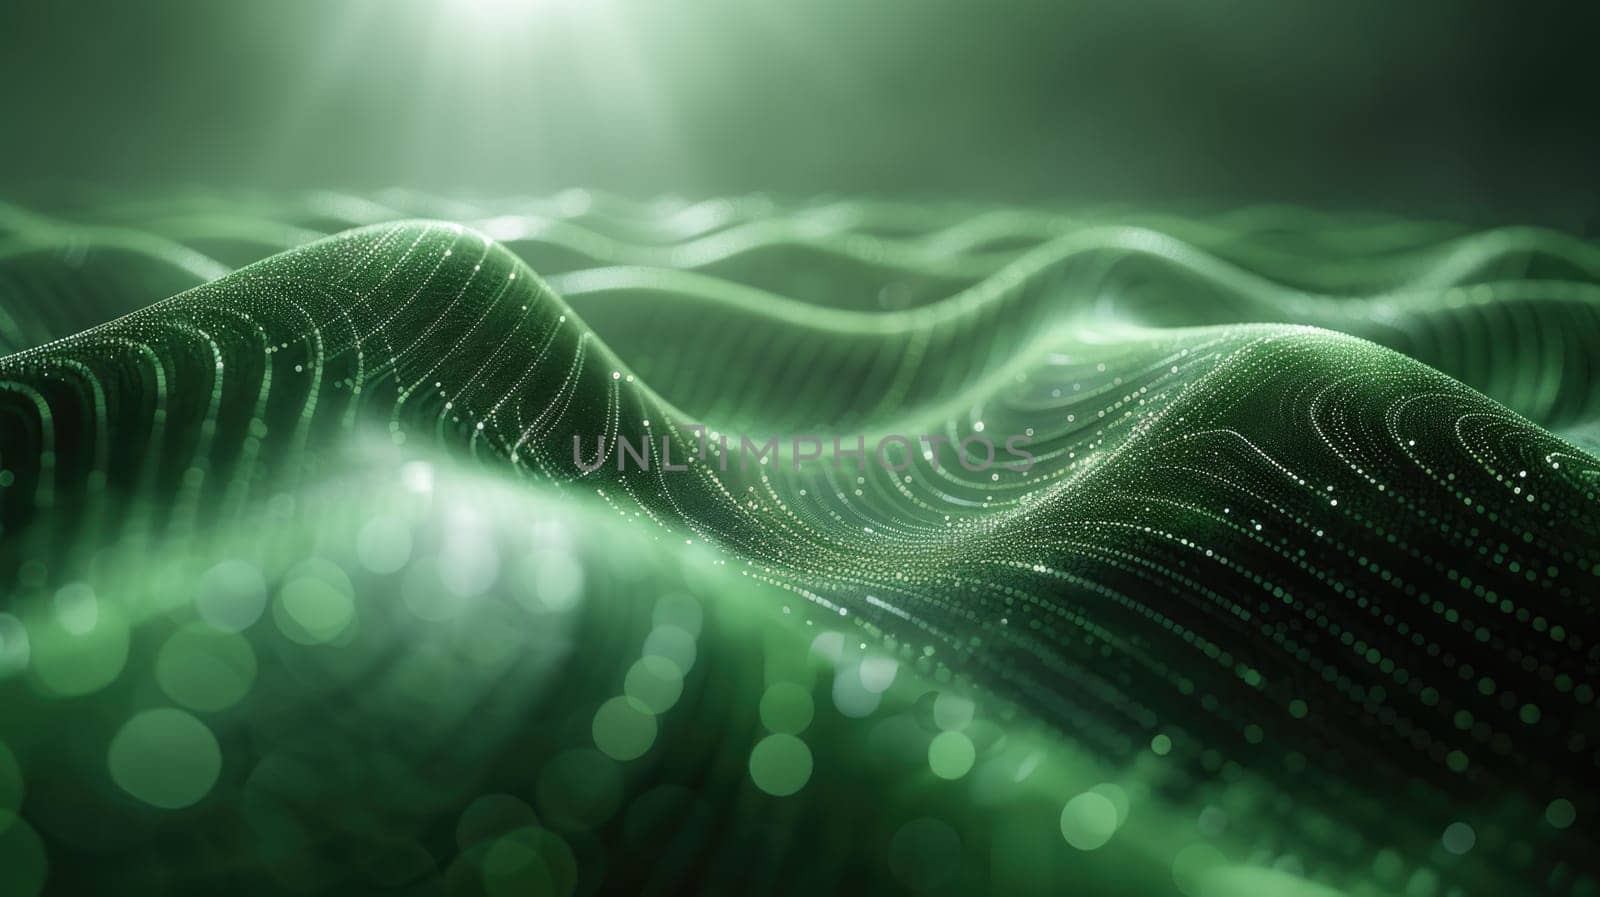 A computer-generated image showcasing a wave in vivid green, capturing the dynamic and abstract nature of the subject.